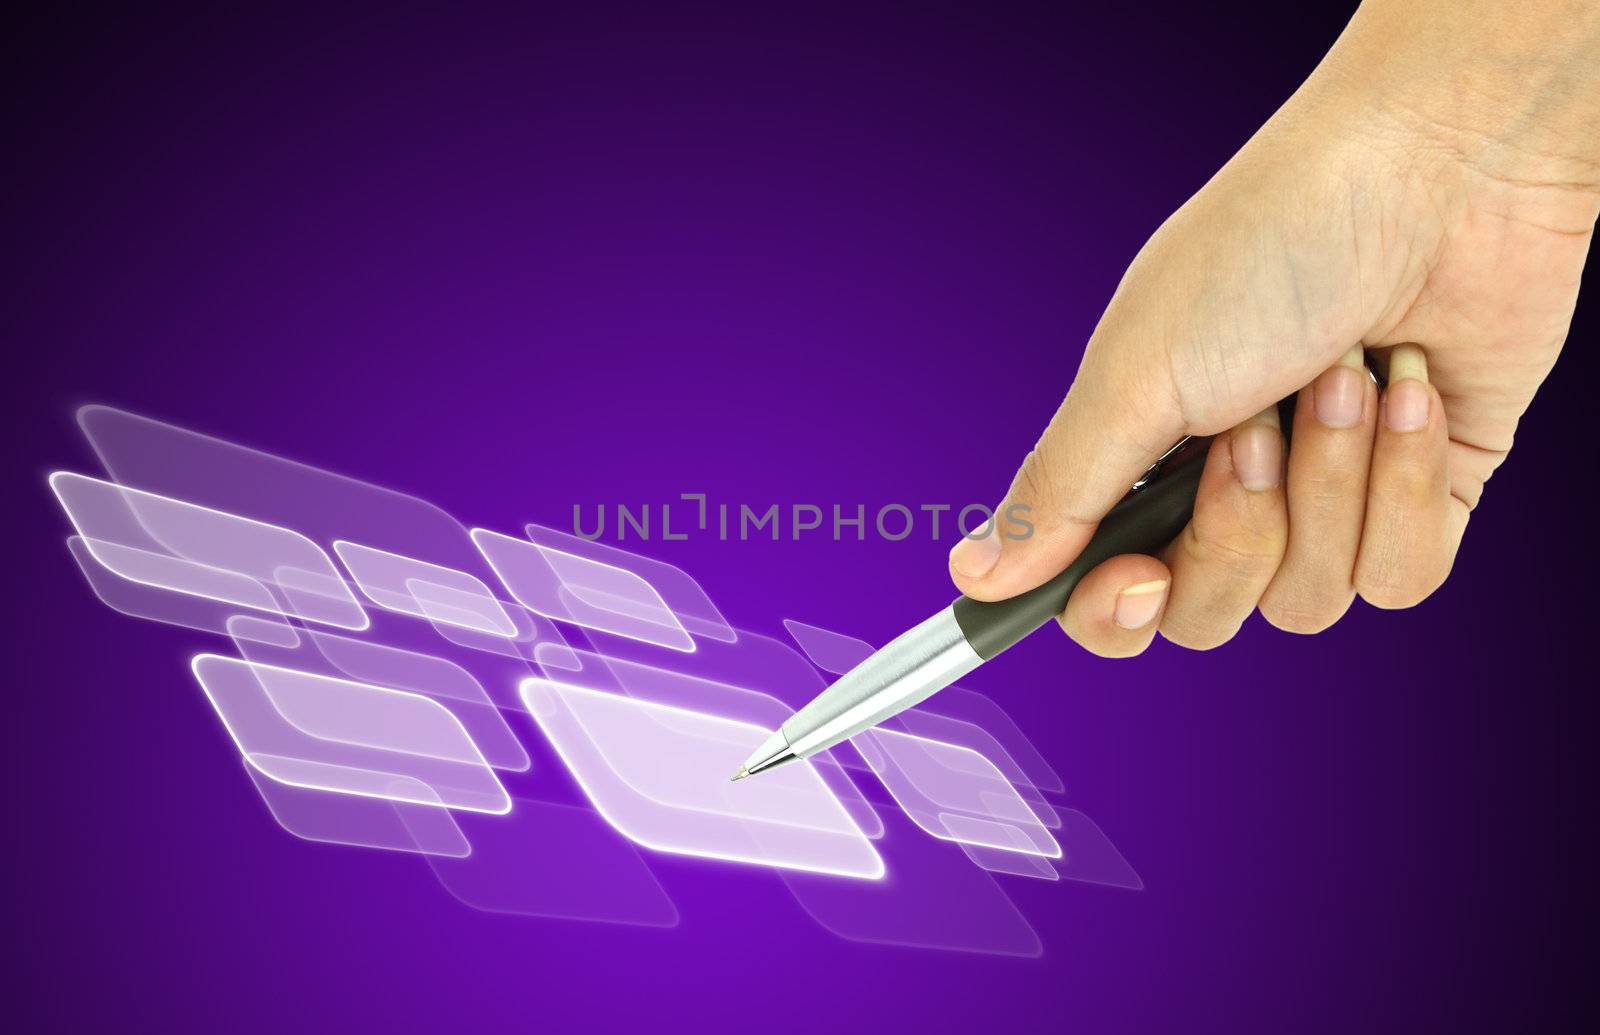 a pen pointer on a touch screen interface by geargodz